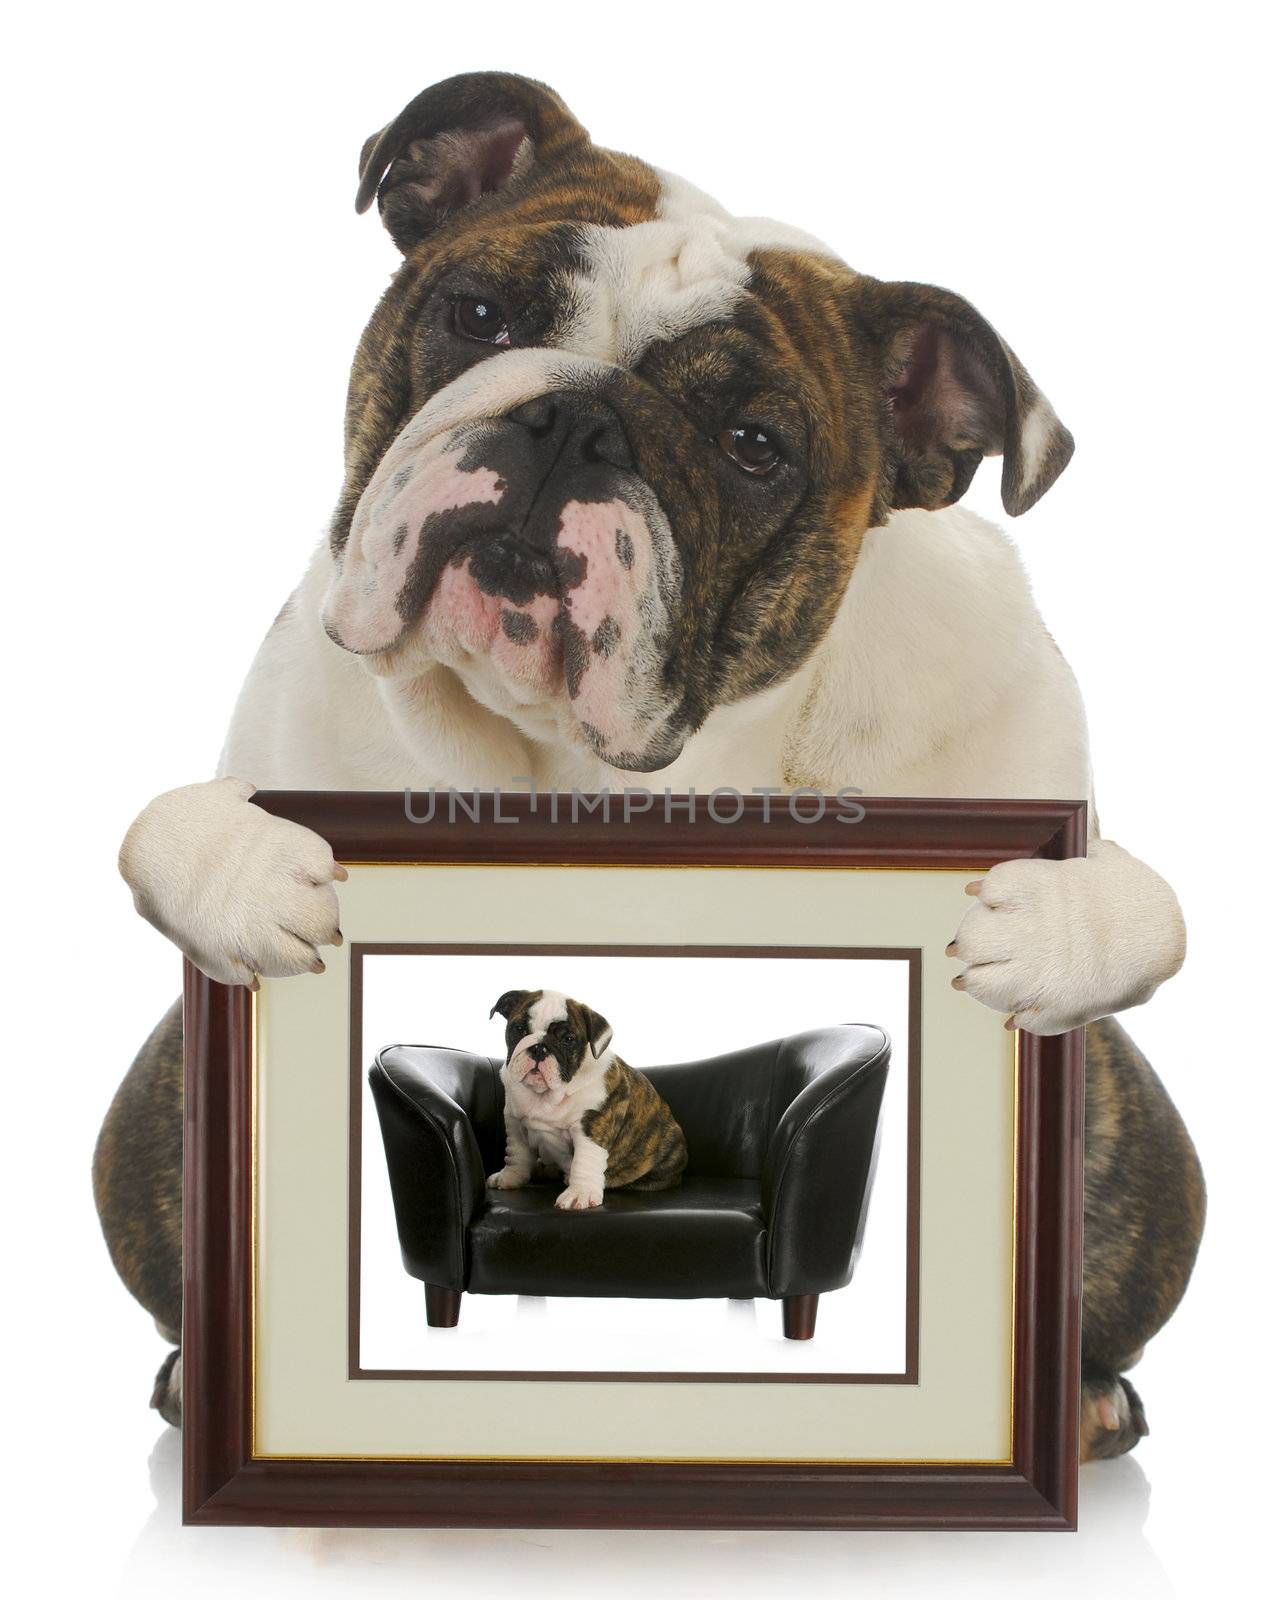 young puppy grown dog - english bulldog holding picture of itself when it was a puppy